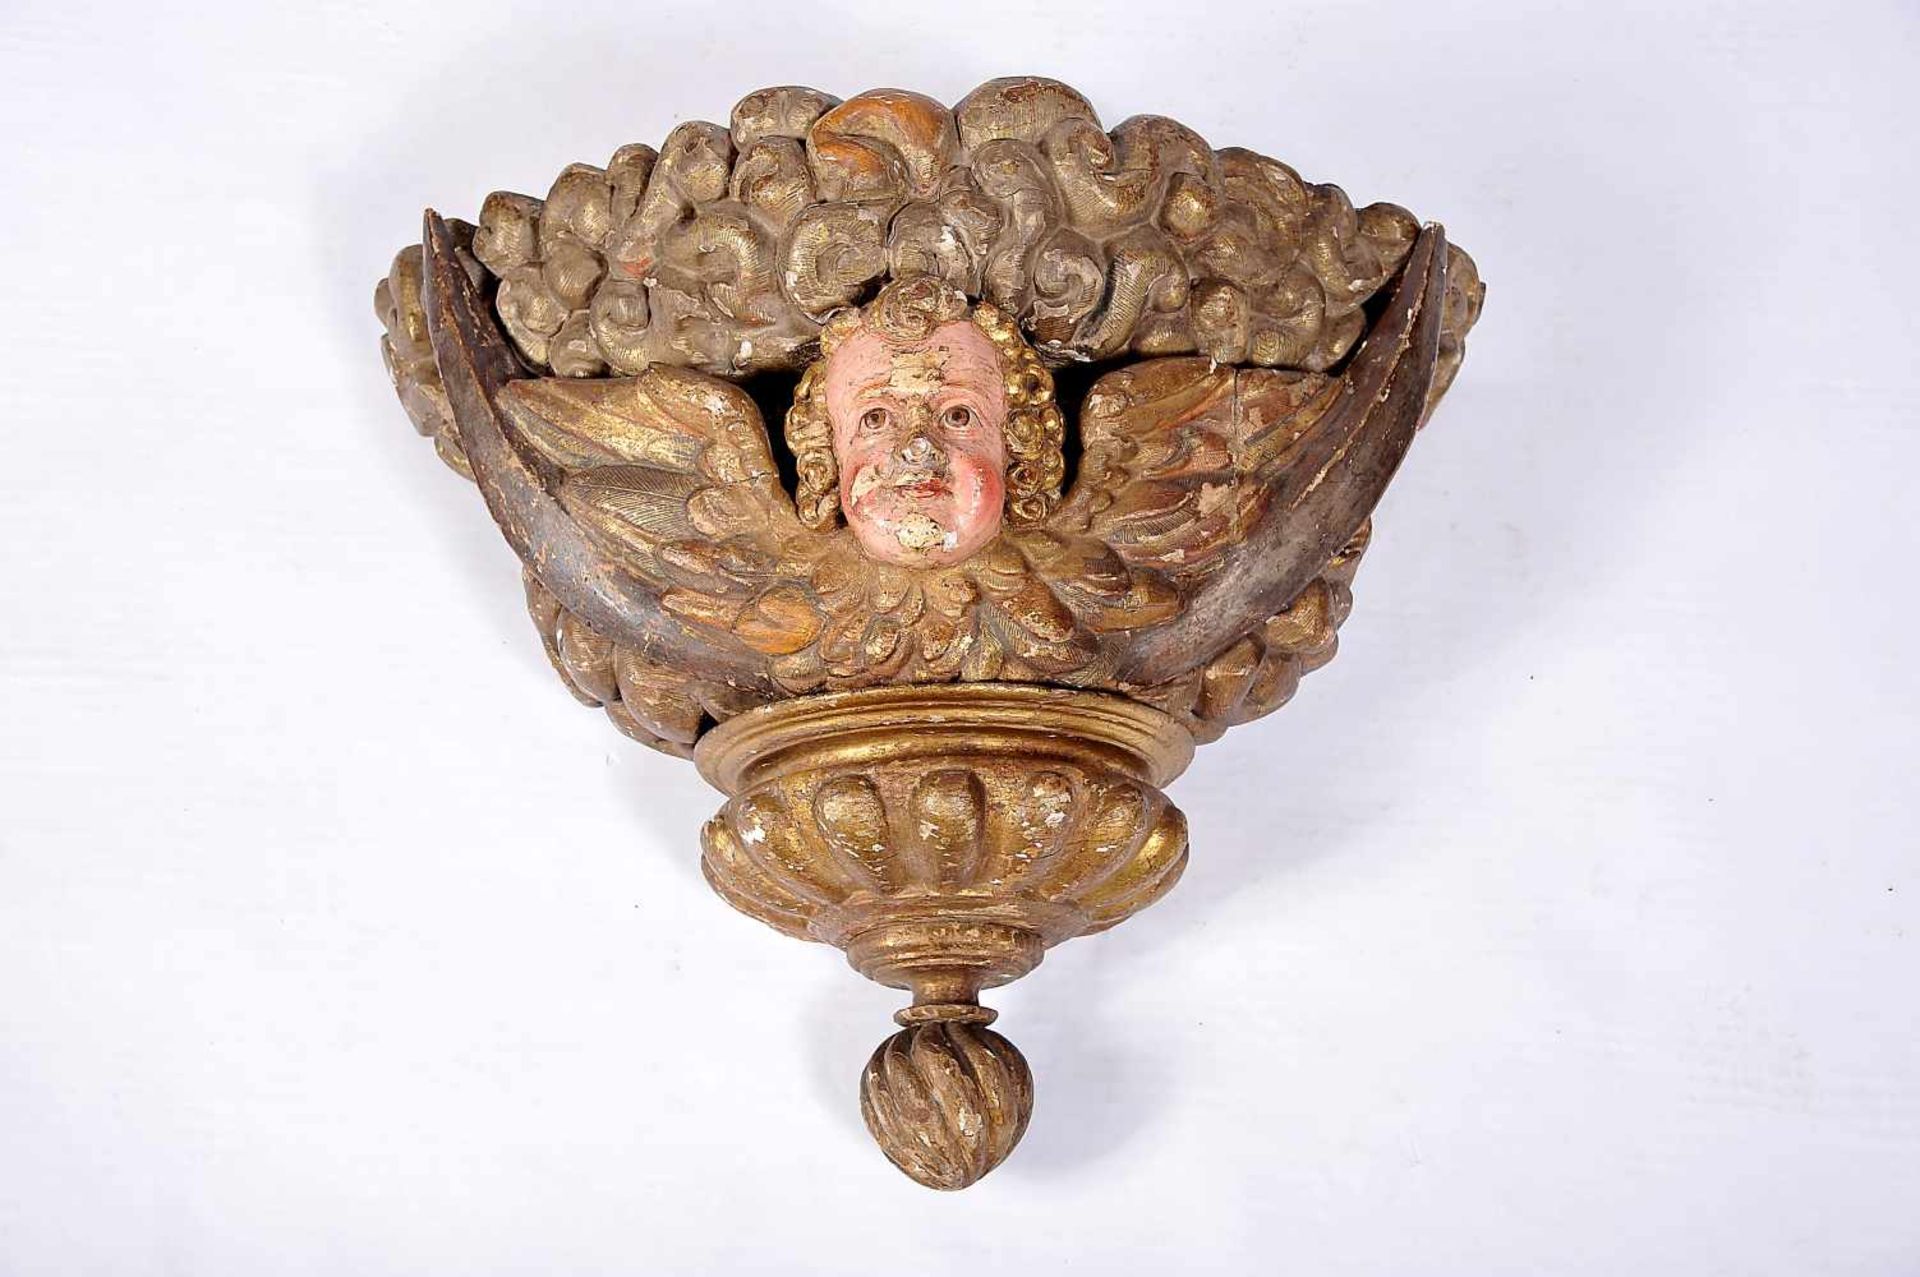 A Large Pedestal, carved, polychrome and gilt wood "Angel head", Portuguese, 18th C., faulst on